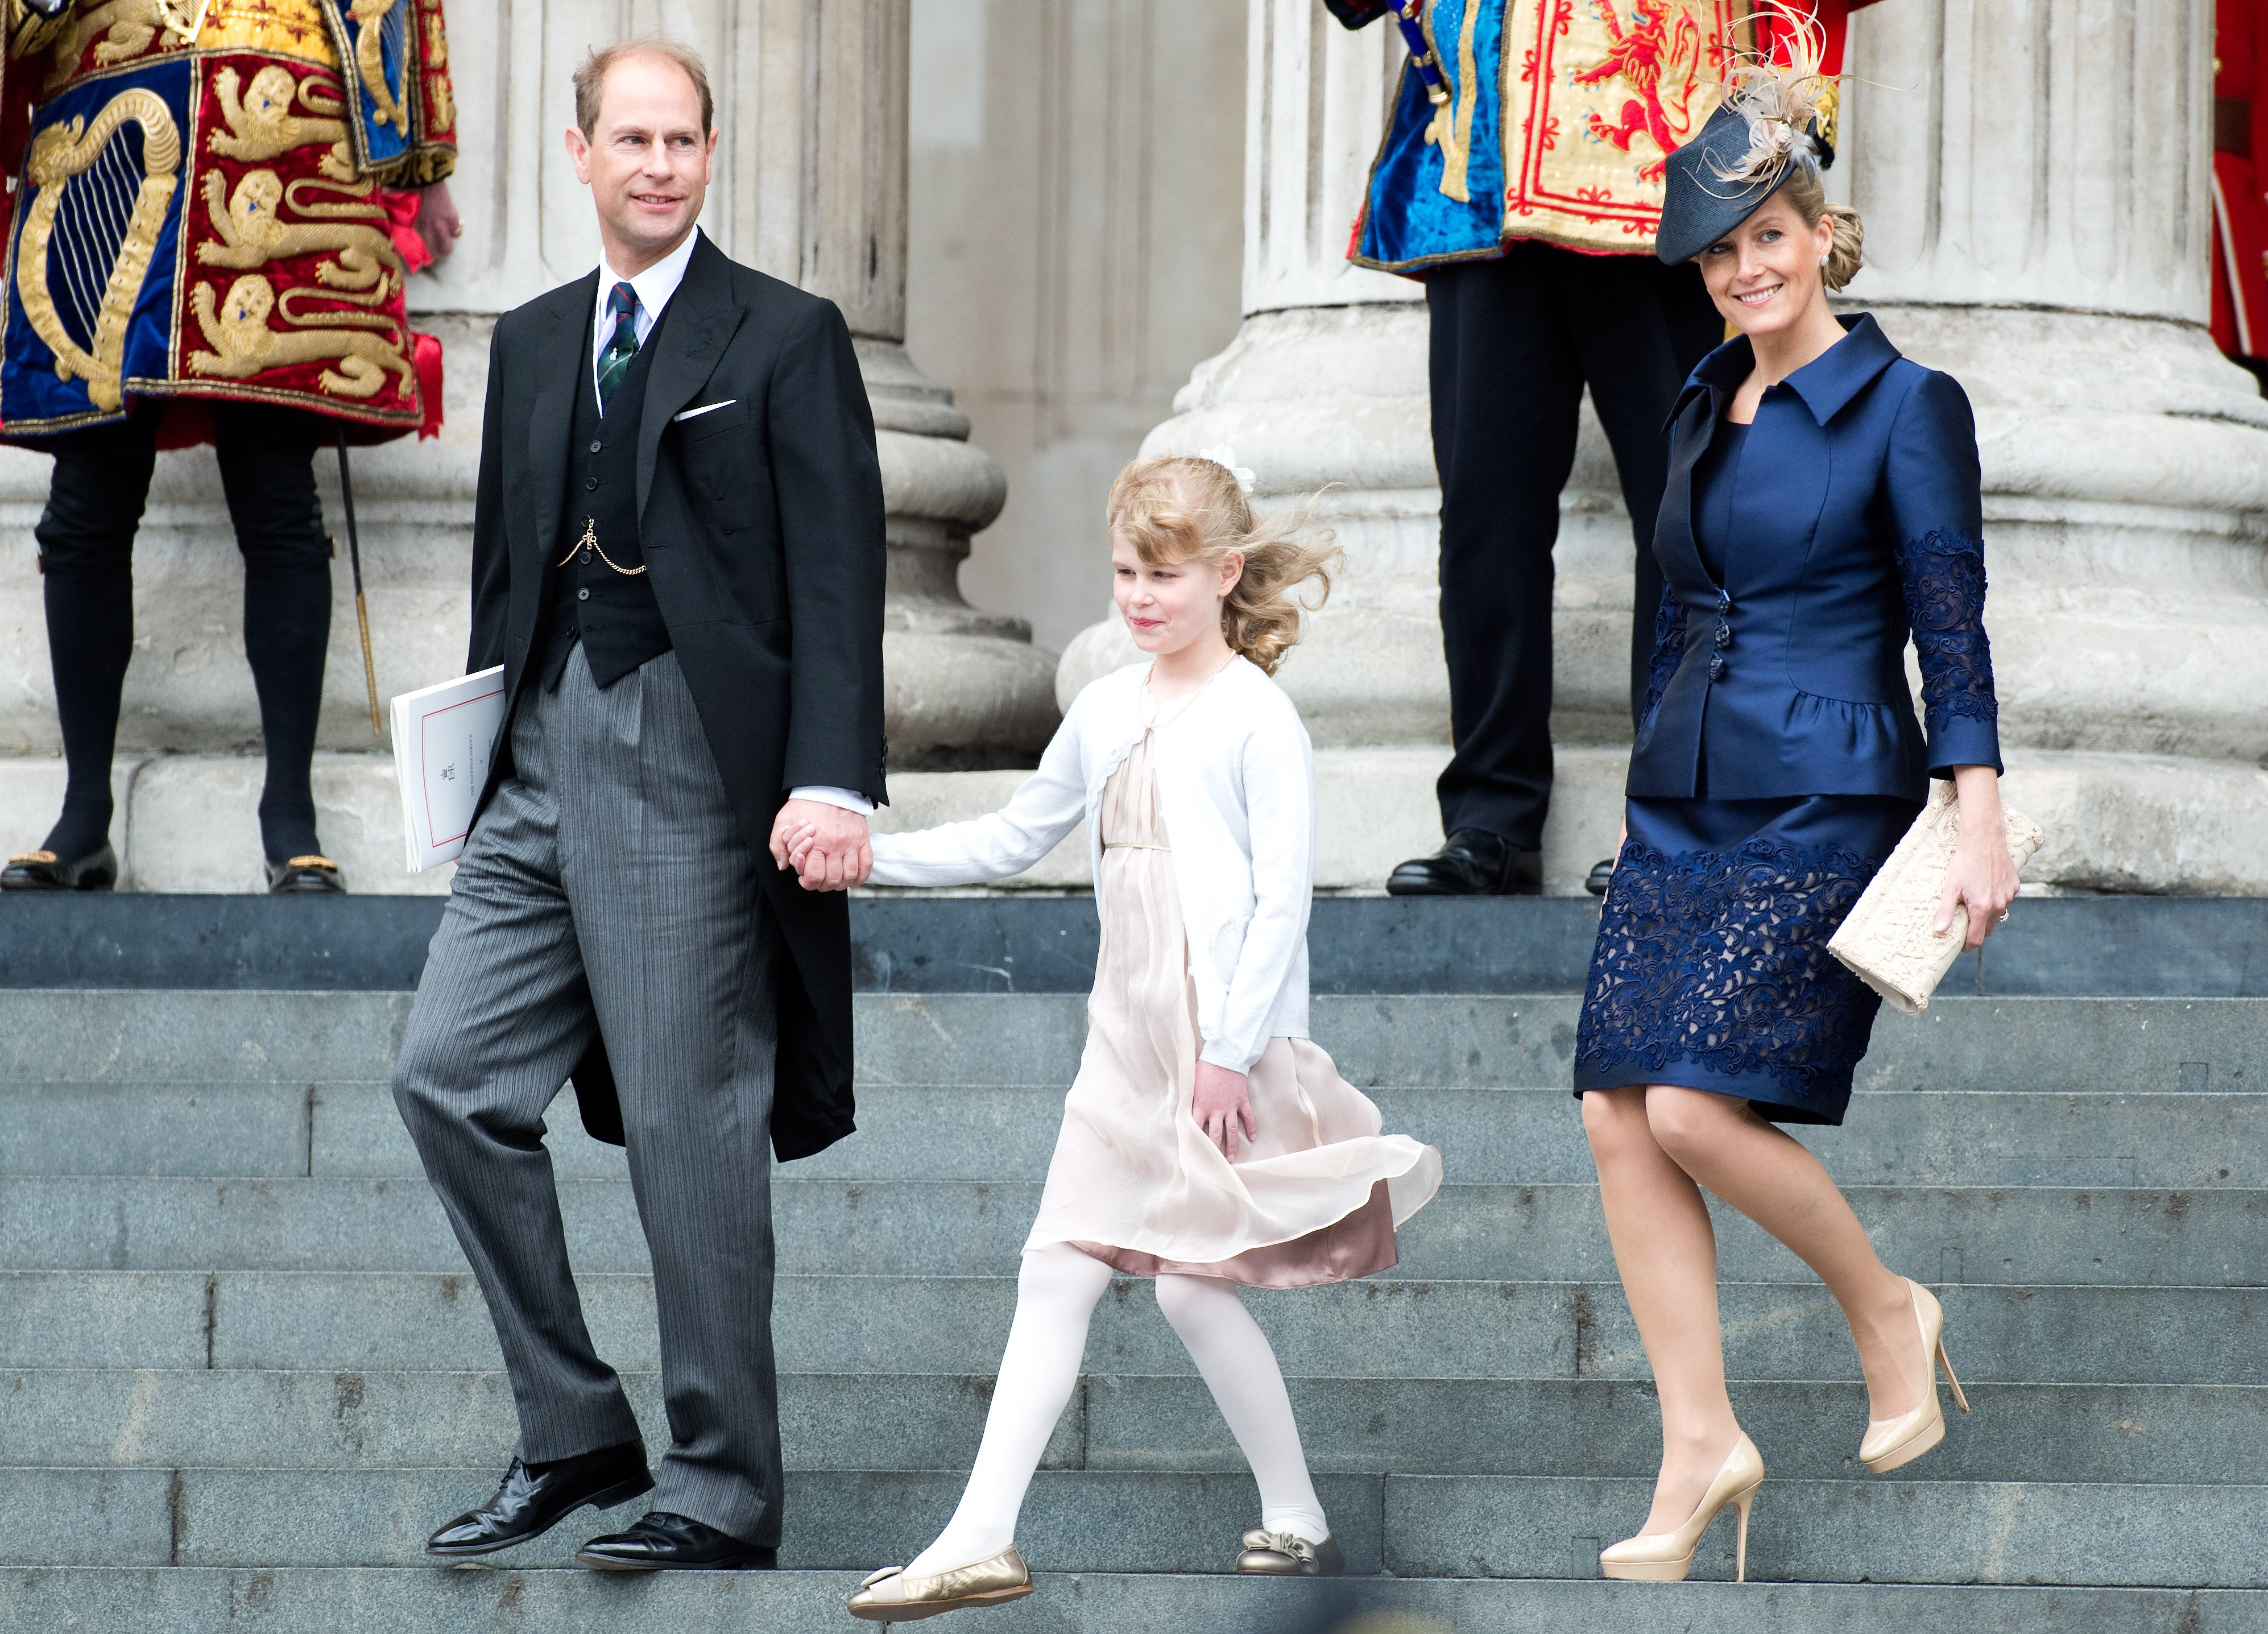 Prince Edward, Earl of Wessex, daughter Lady Louise Windsor and Sophie Countess of Wessex attend the Service of Thanksgiving at St Paul's Cathedral as part of the Diamond Jubilee, marking the 60th anniversary of the accession of Queen Elizabeth II on June 5, 2012, in London, England. | Source: Getty Images